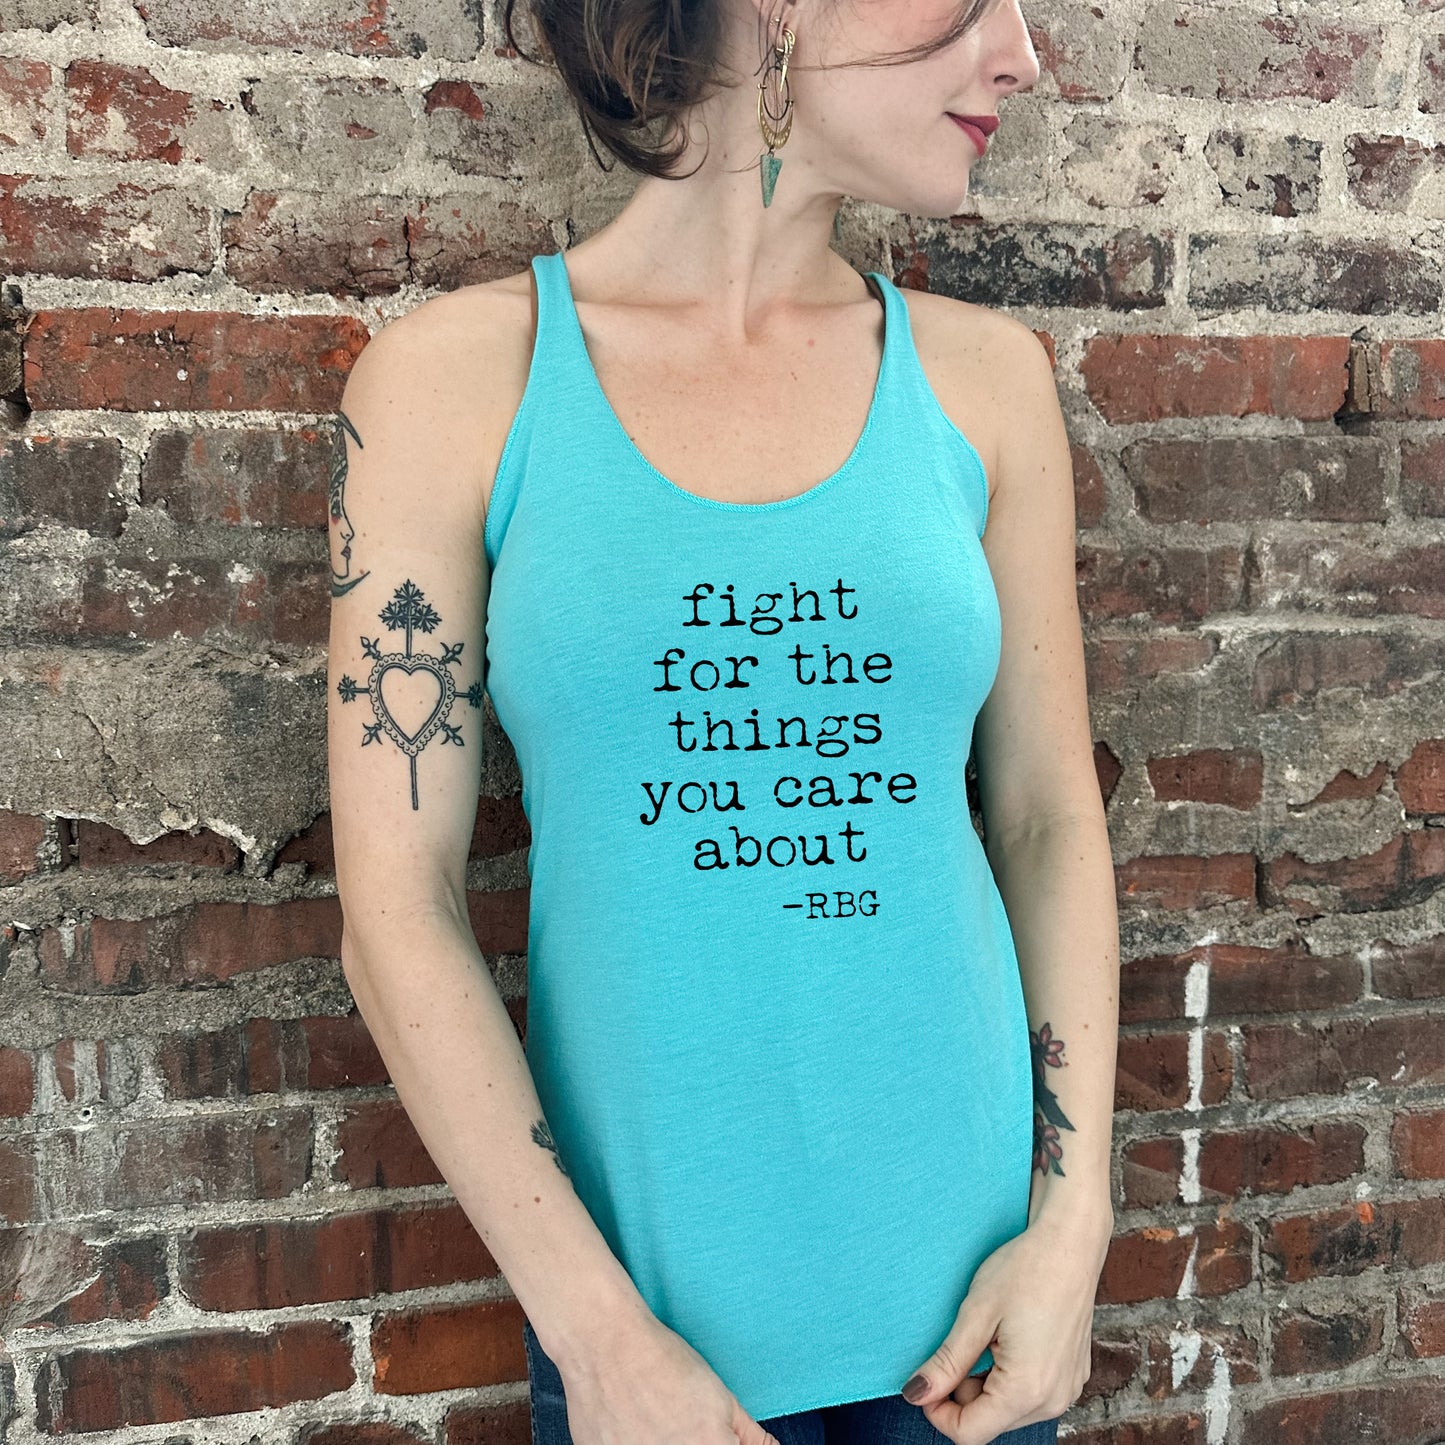 Fight Quote RBG (Ruth Bader Ginsburg) - Women's Tank - Heather Gray, Tahiti, or Envy